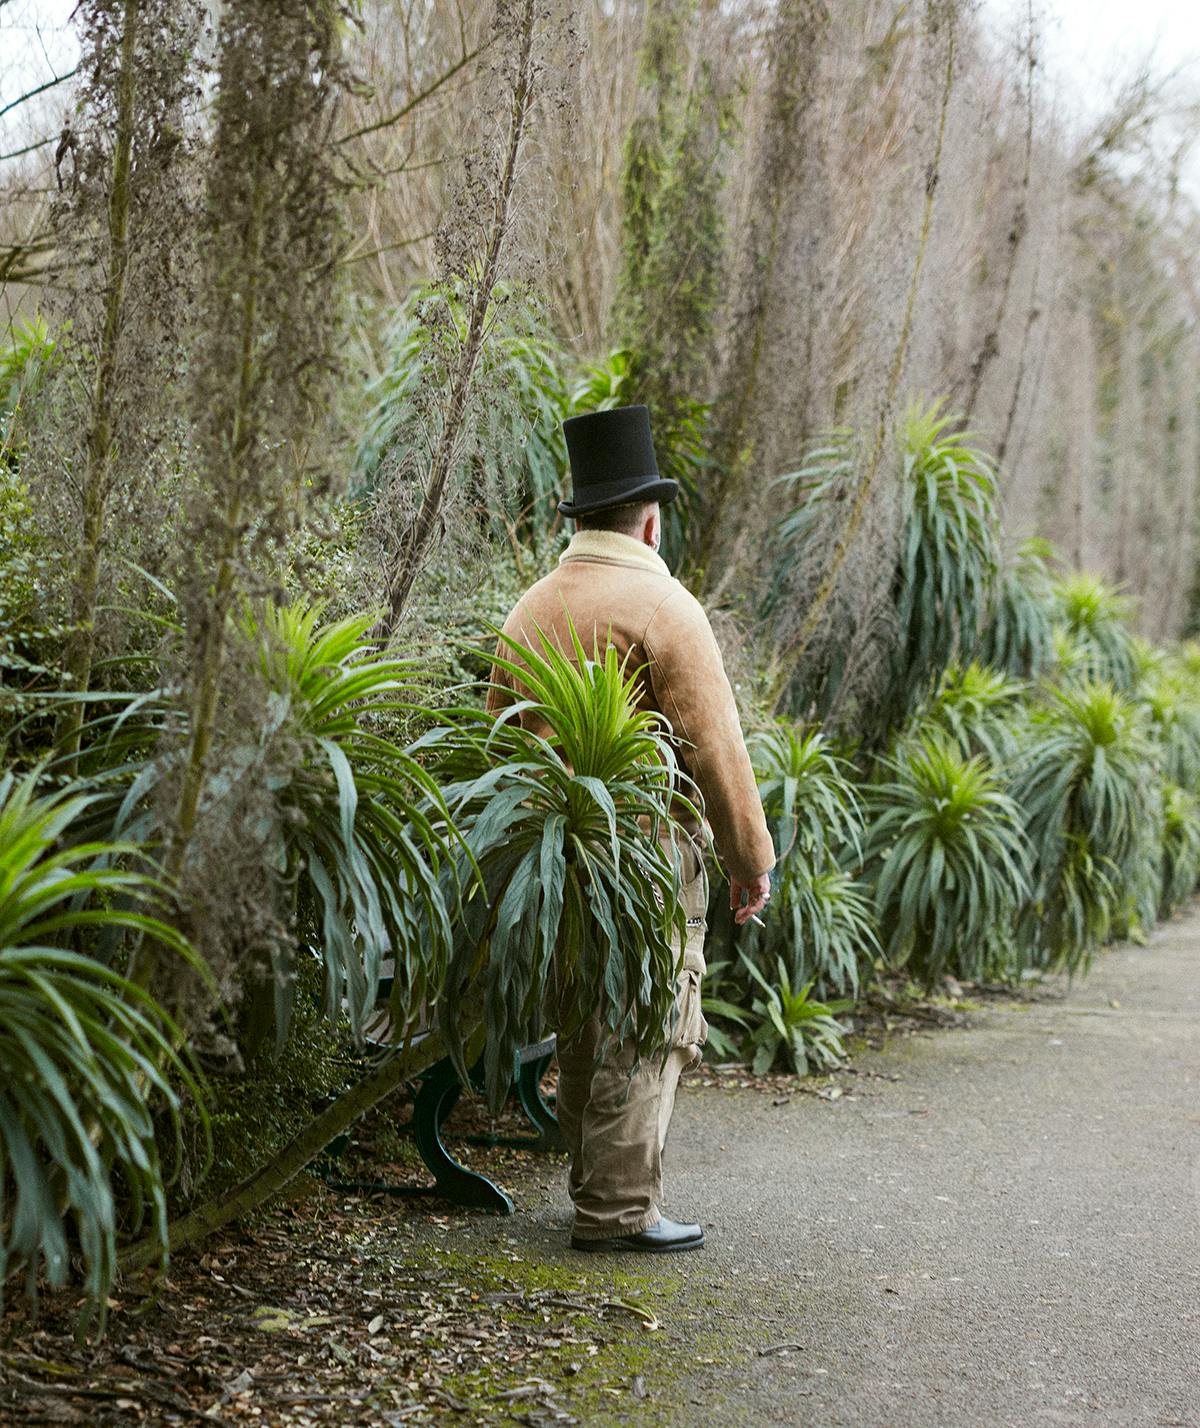 Photograph of a person from behind wearing a top hat and partially concealed by plants by Hugh Fox